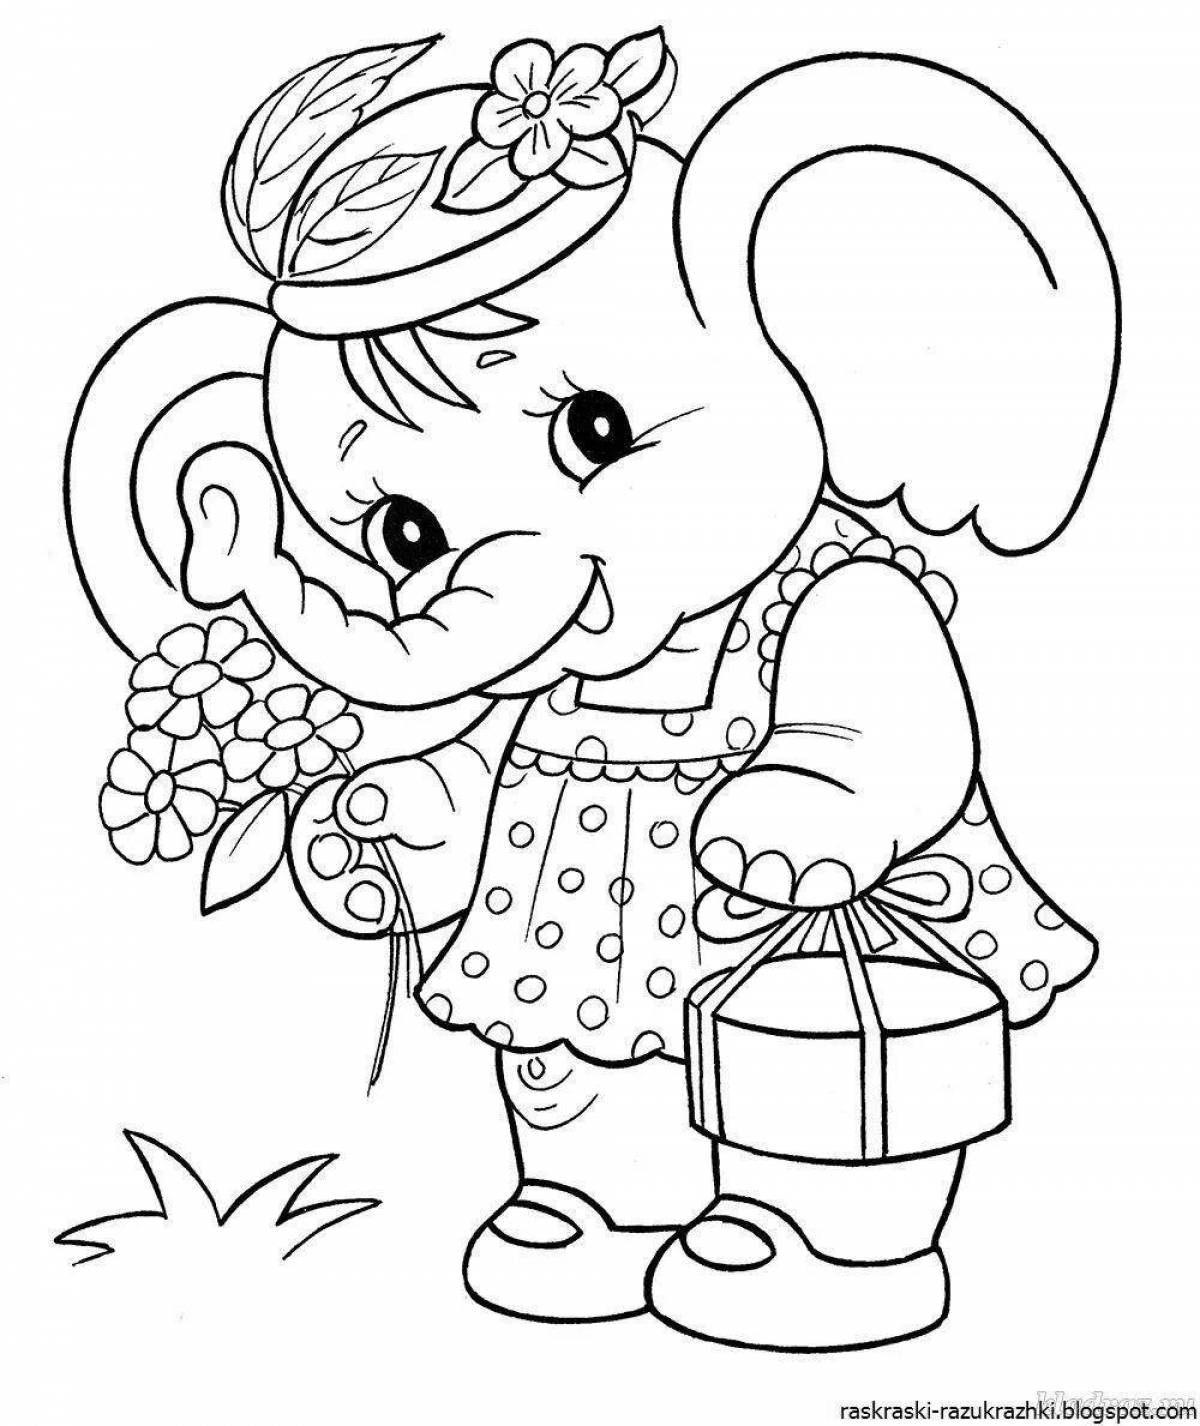 Coloring book for children 5-6 years old for girls animals